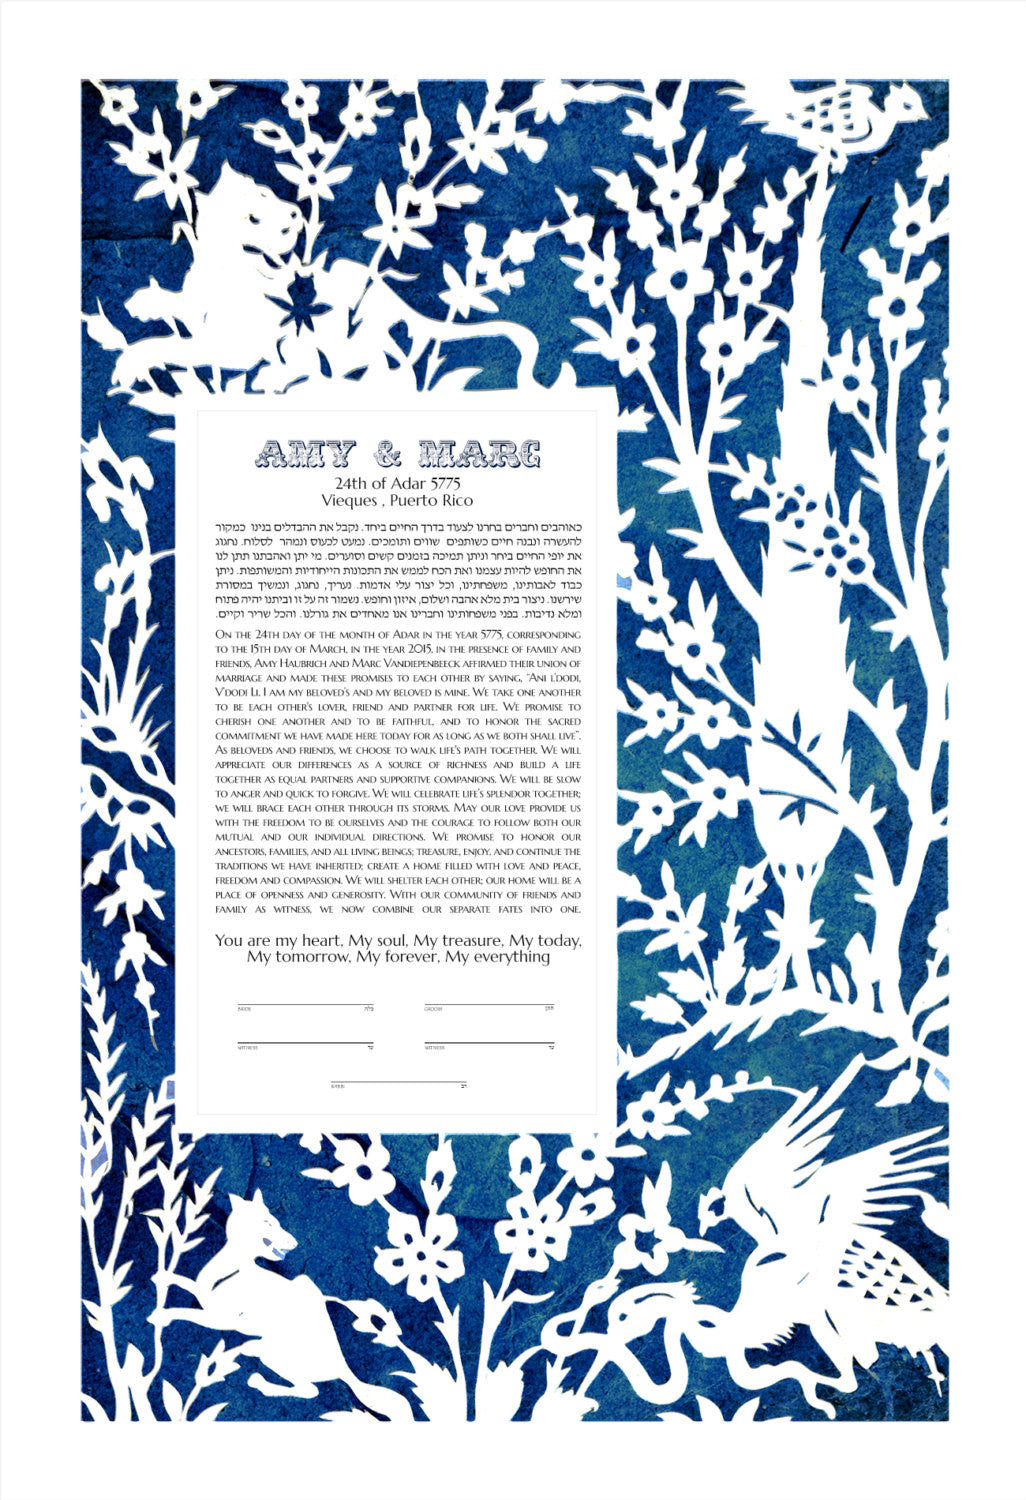 Papercut Ketubah or Woodcut Garden Ketubah, Modern Ketubah Print with woodcut layer - papercut also available - Jewish Marriage Contract